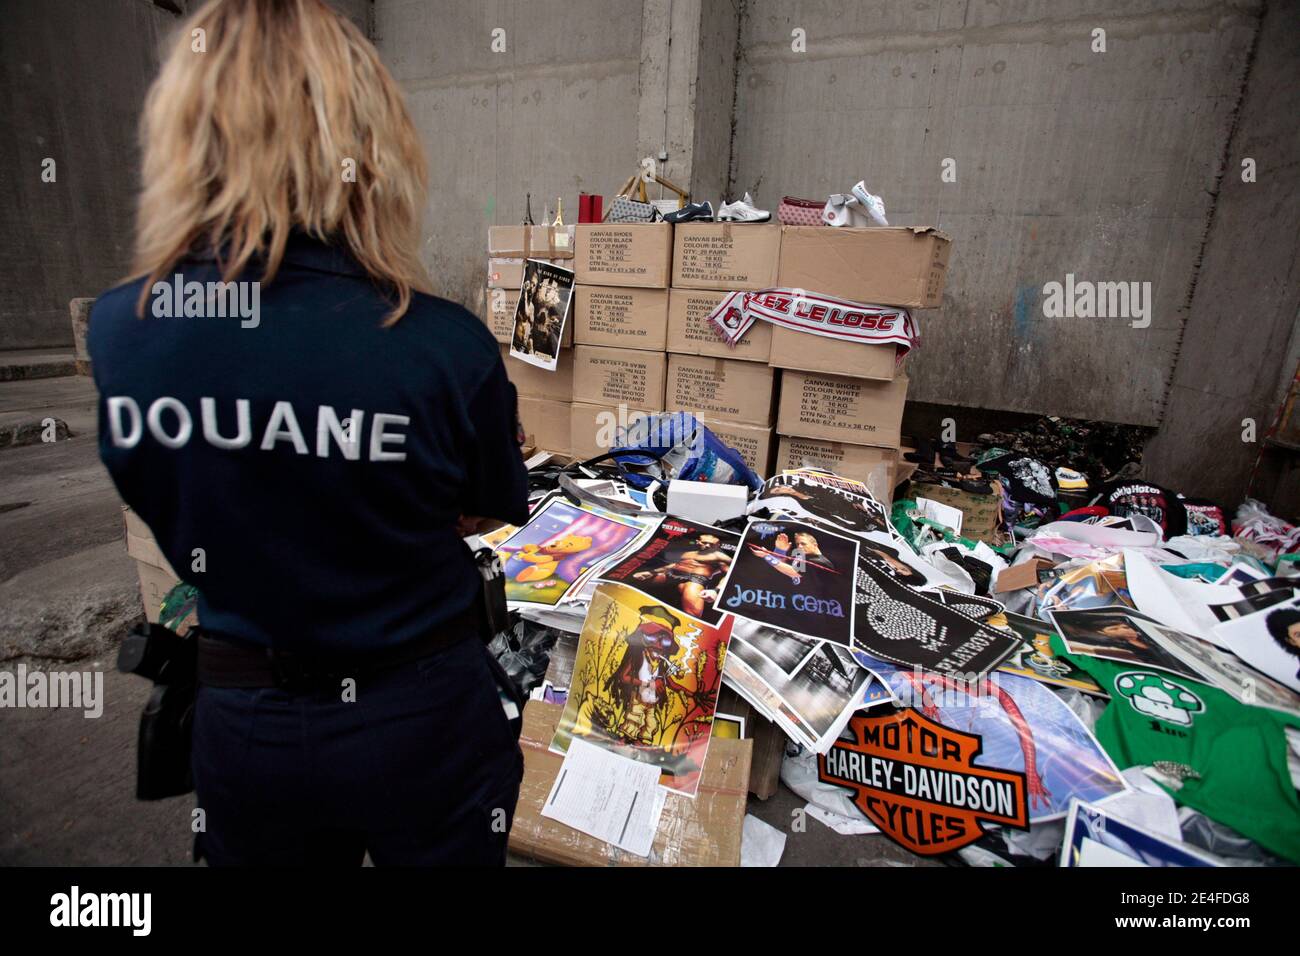 Agents of the French customs proceed to the destruction of several  thousands articles of counterfeit seized during the 'Braderie de Lille'.  The objects are incinerated in a center of valorization of waste